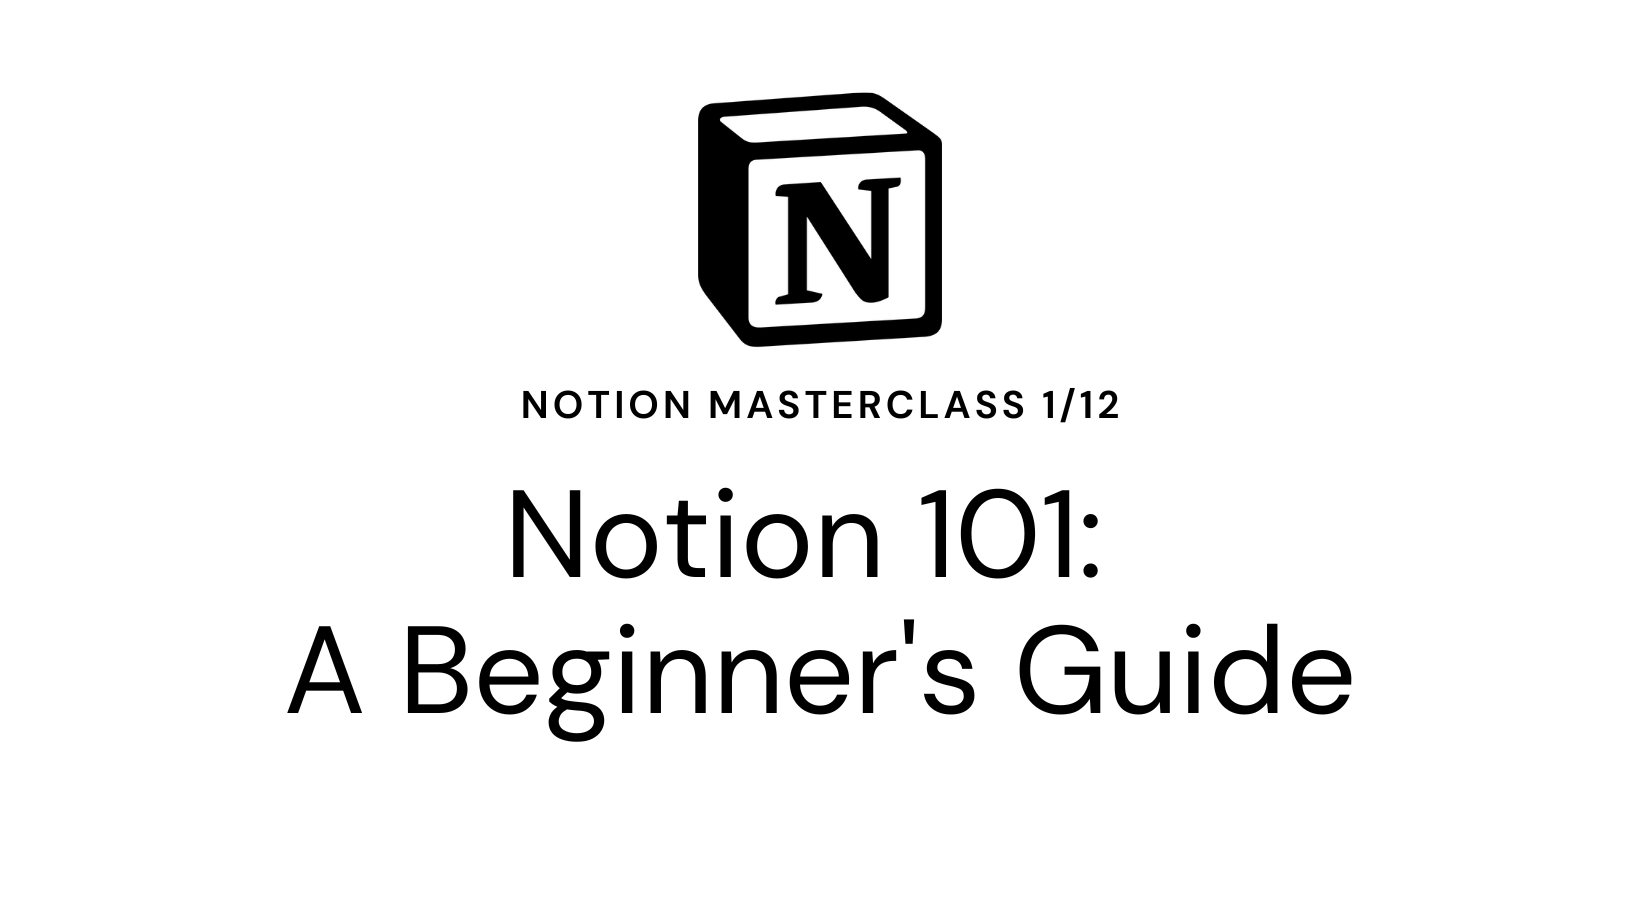 Notion Masterclass 1/12 Notion 101: A Beginner's Guide